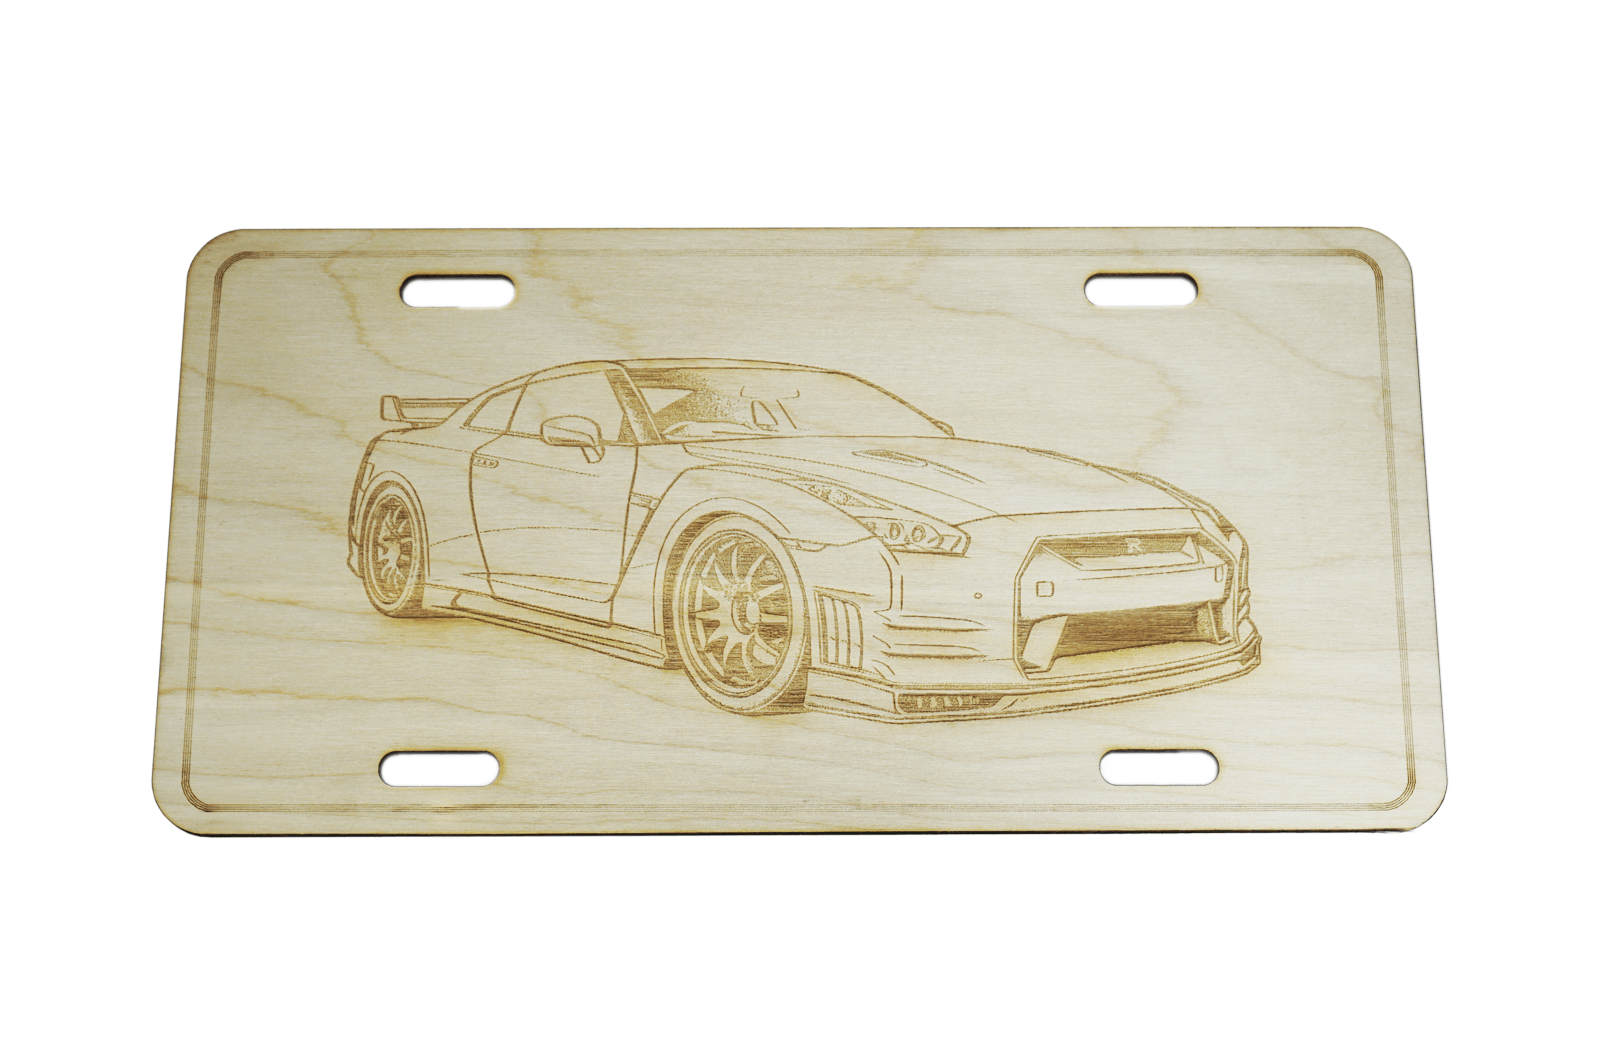 ZSPEC Nissan GTR R35 License Plate, Birch, Ornament for Office, Garage or Man-Cave